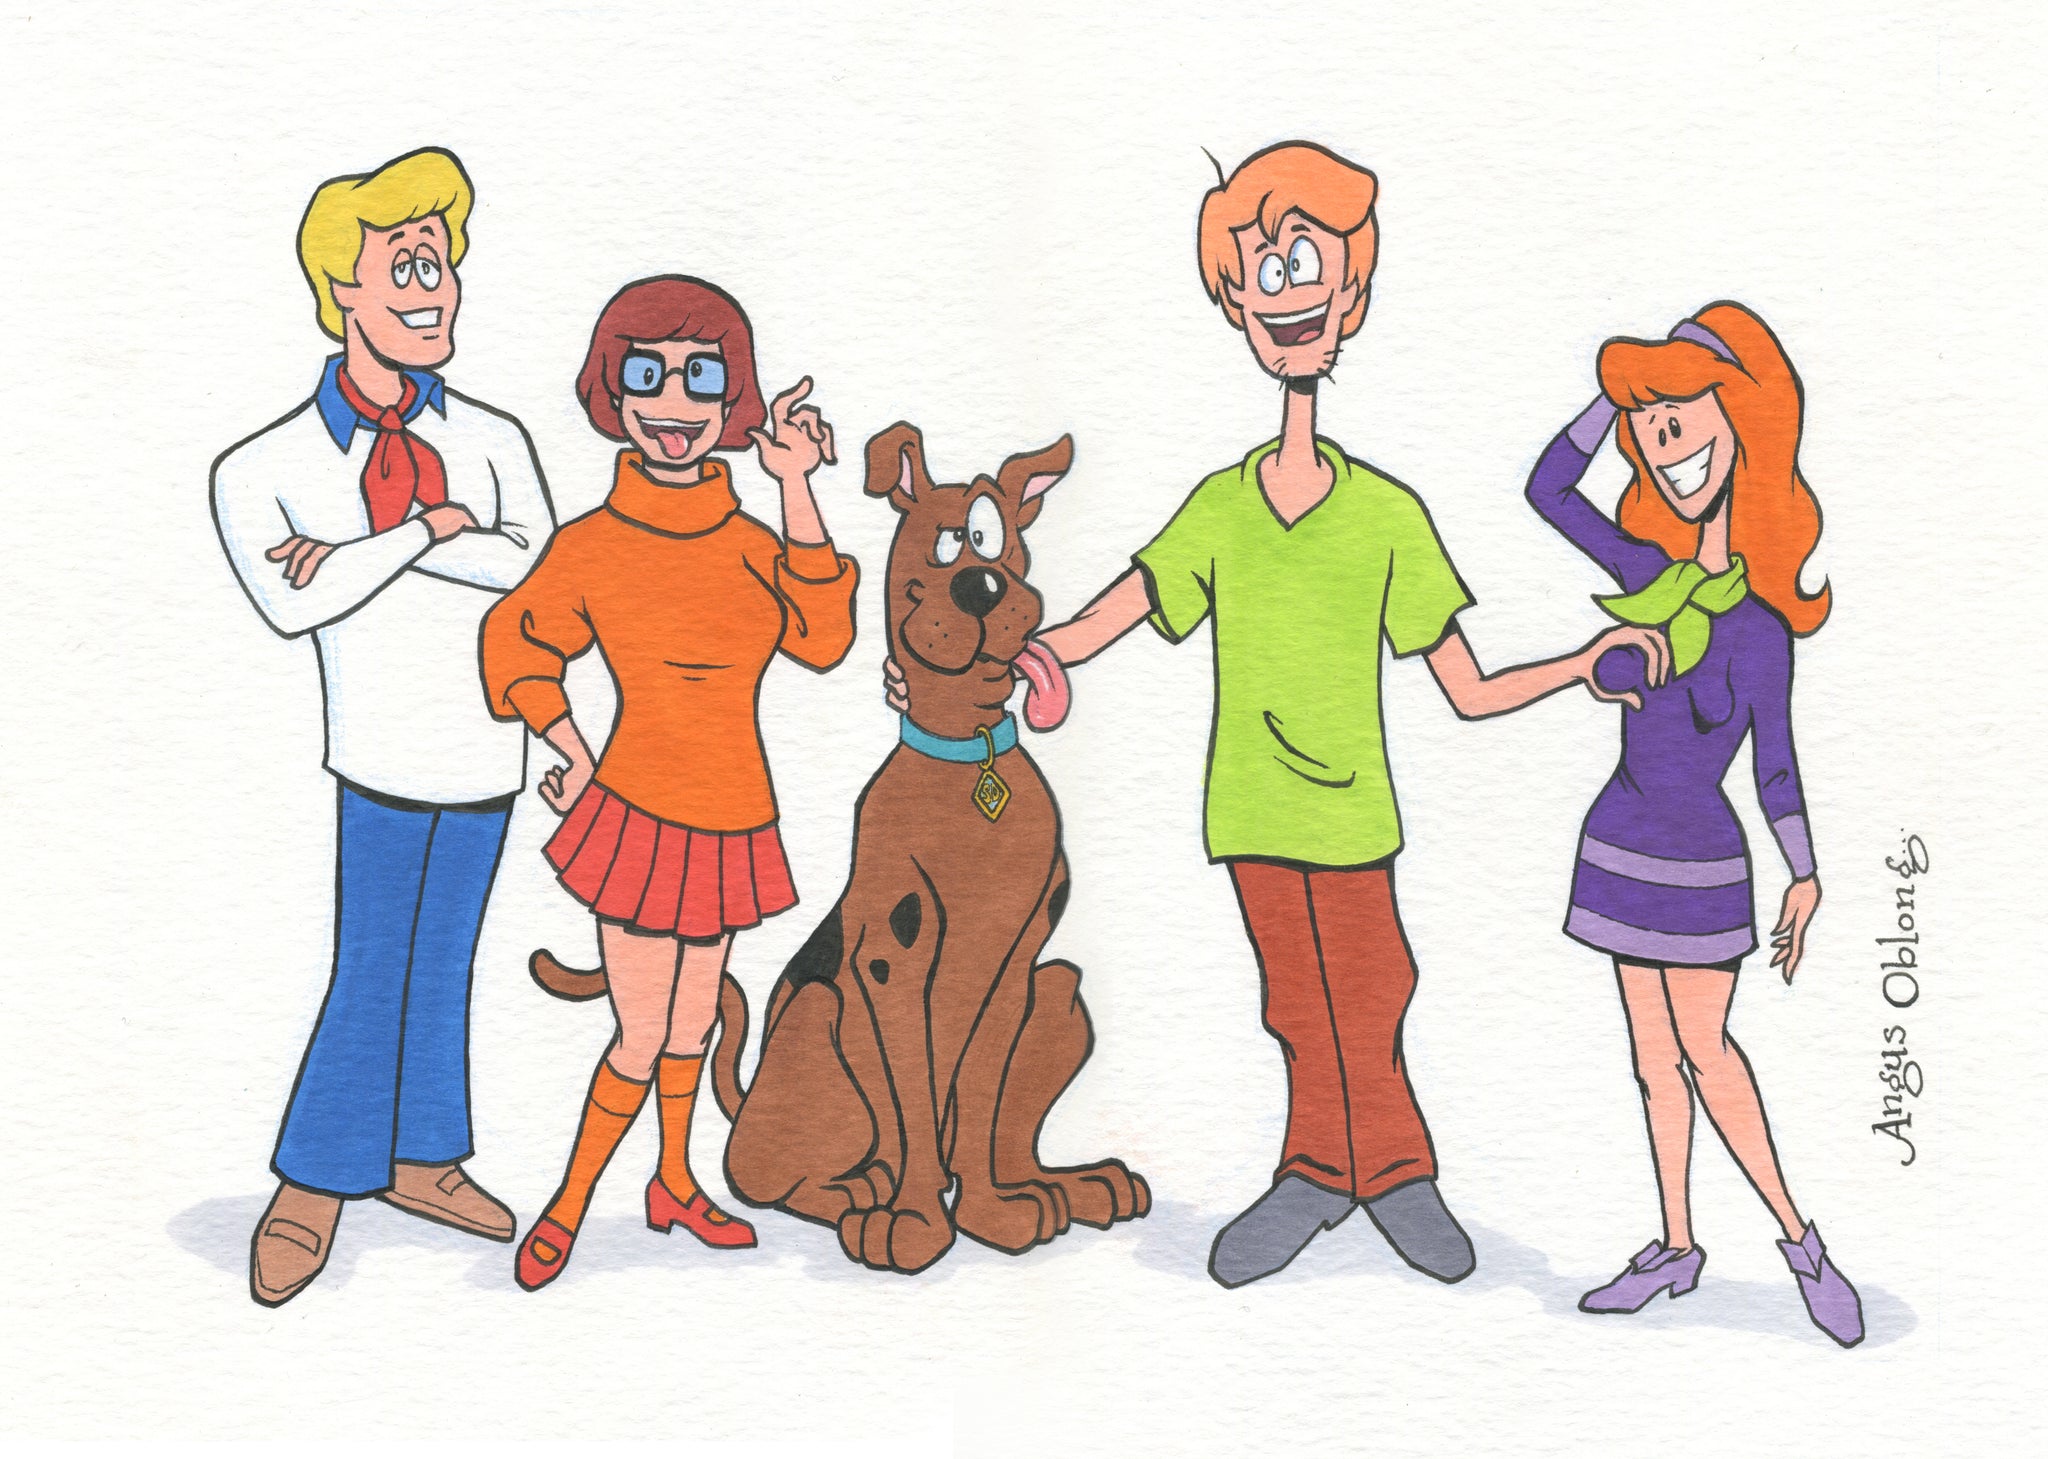 Scooby Doo & The Gang. – Angus Oblong.